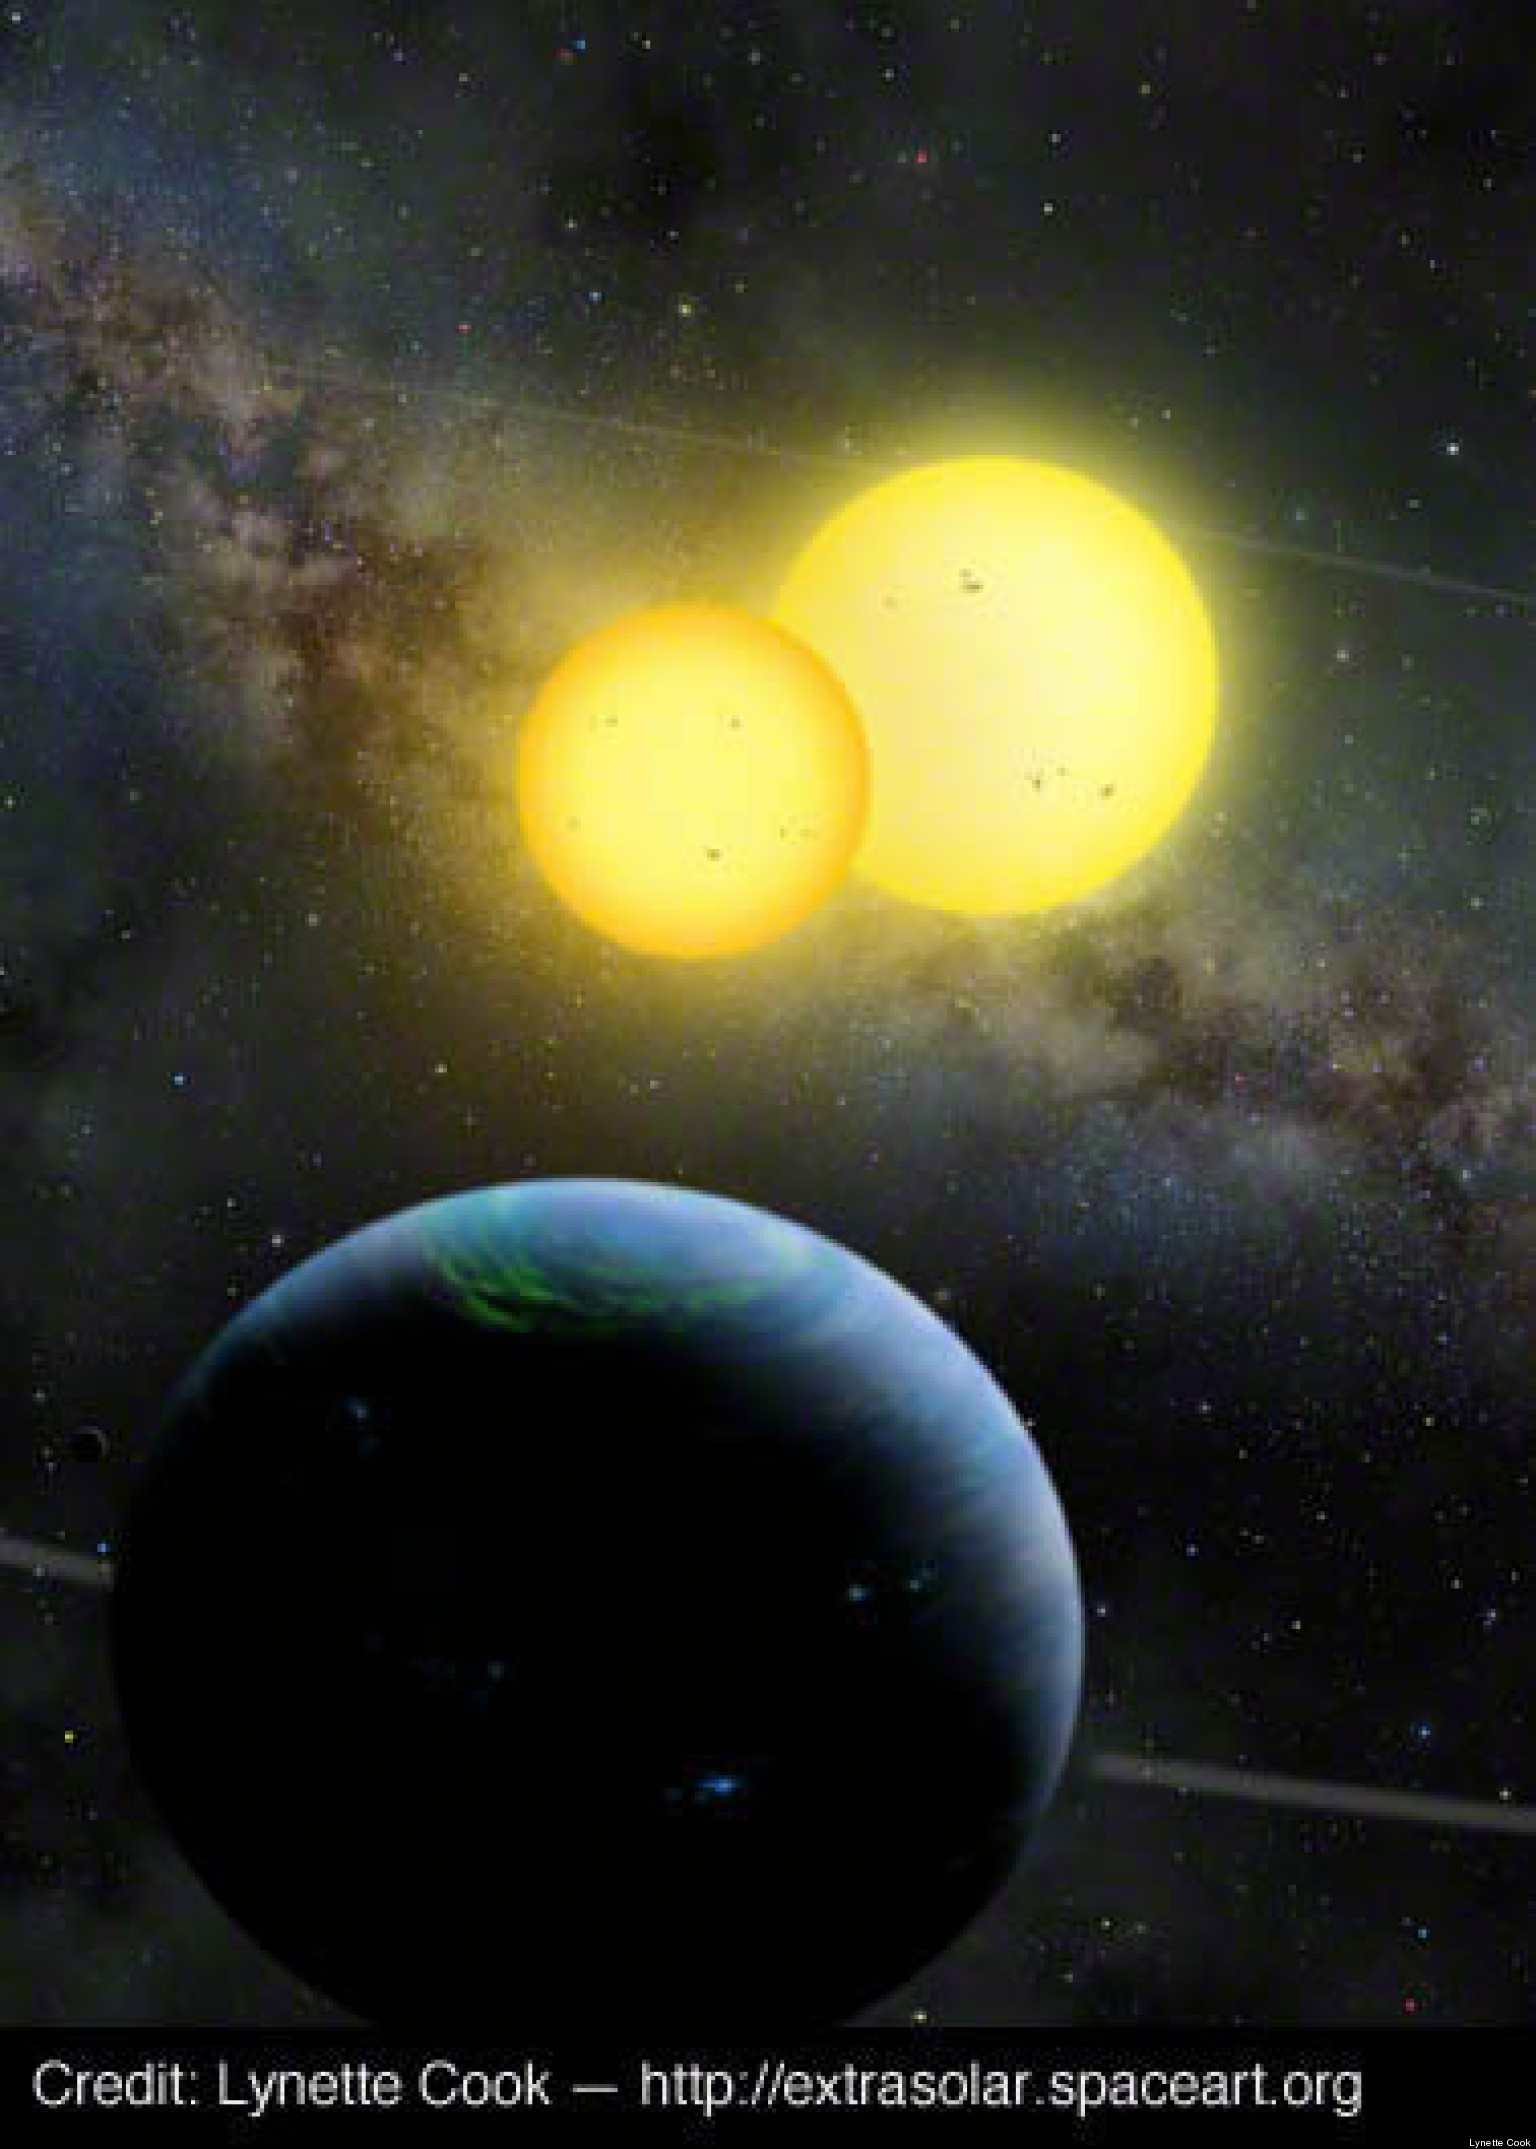 'Tatooine' Planets: Life Said More Likely On Alien Worlds With Two Suns